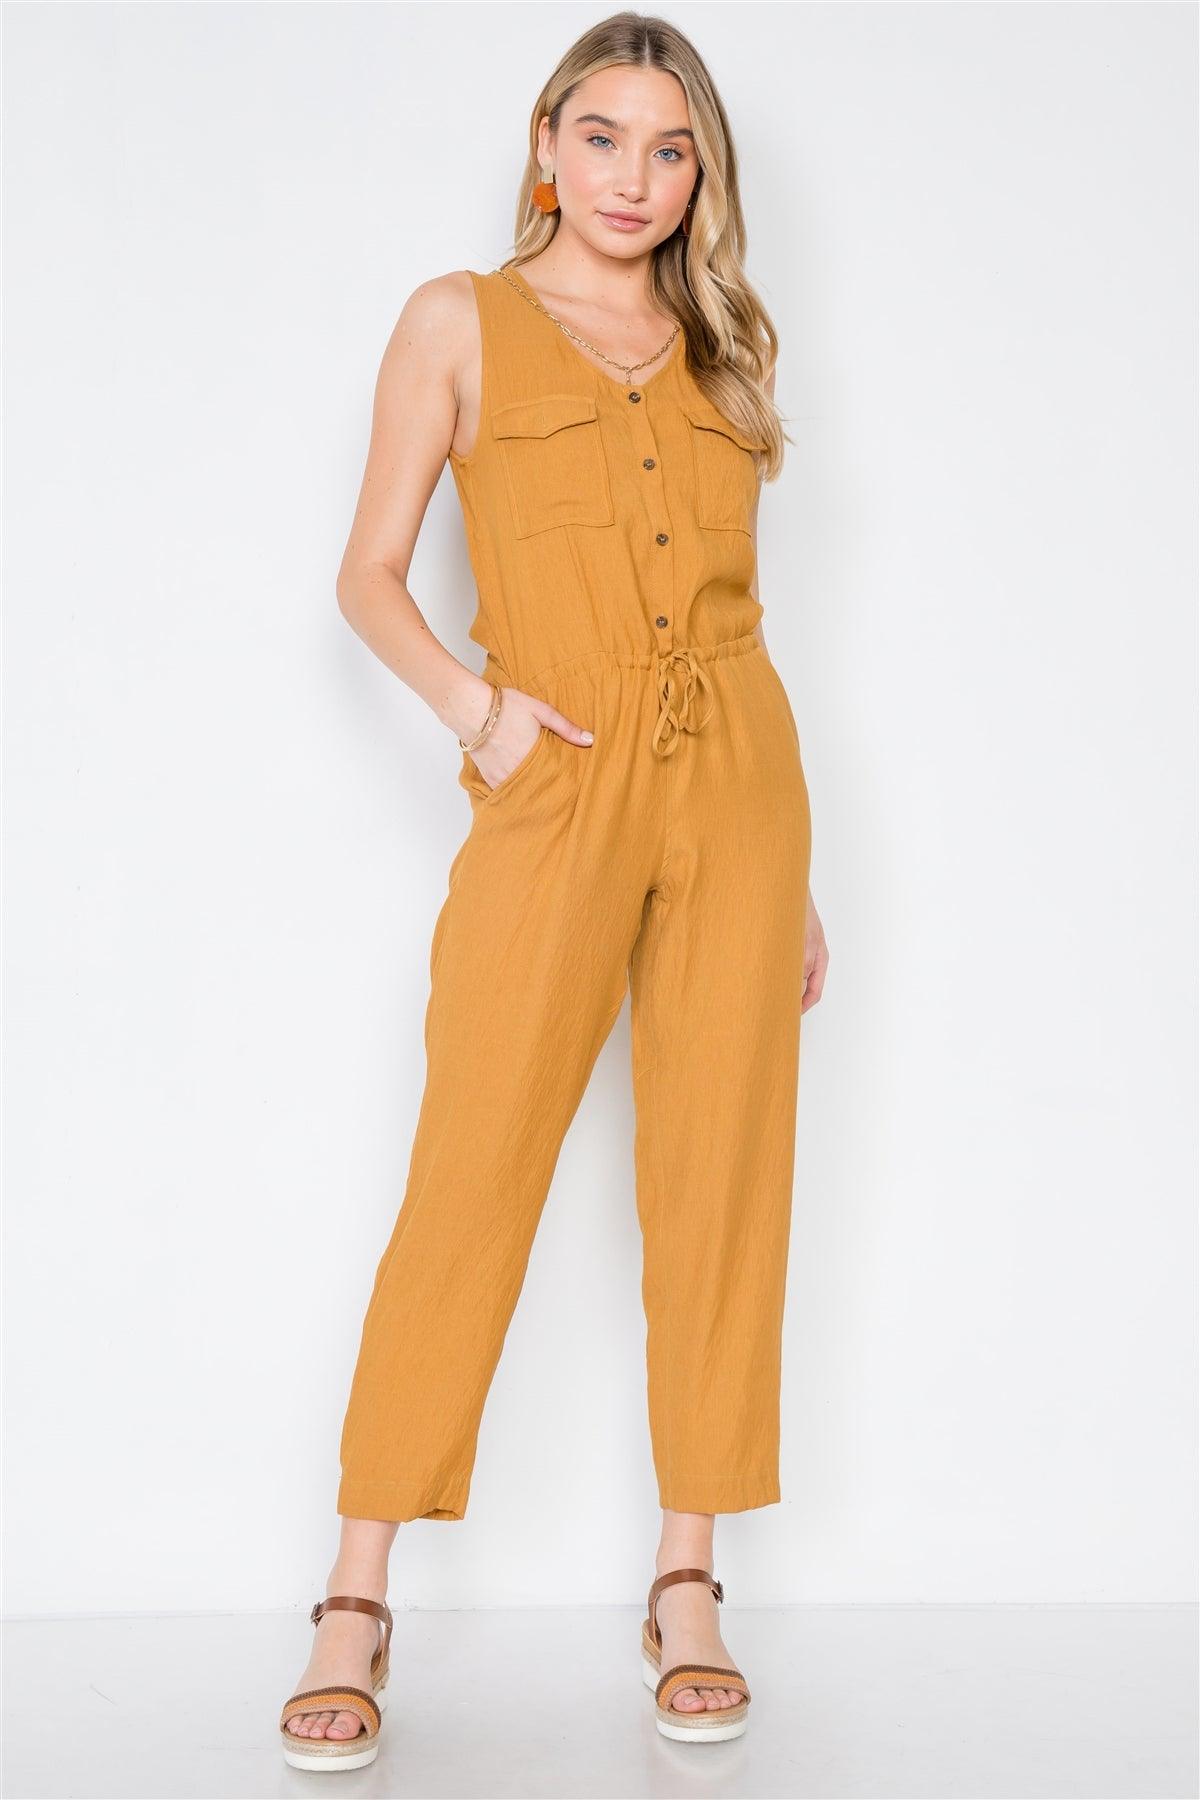 Gold Mustard Button-Front Sleeveless Casual Jumpsuit /3-2-1